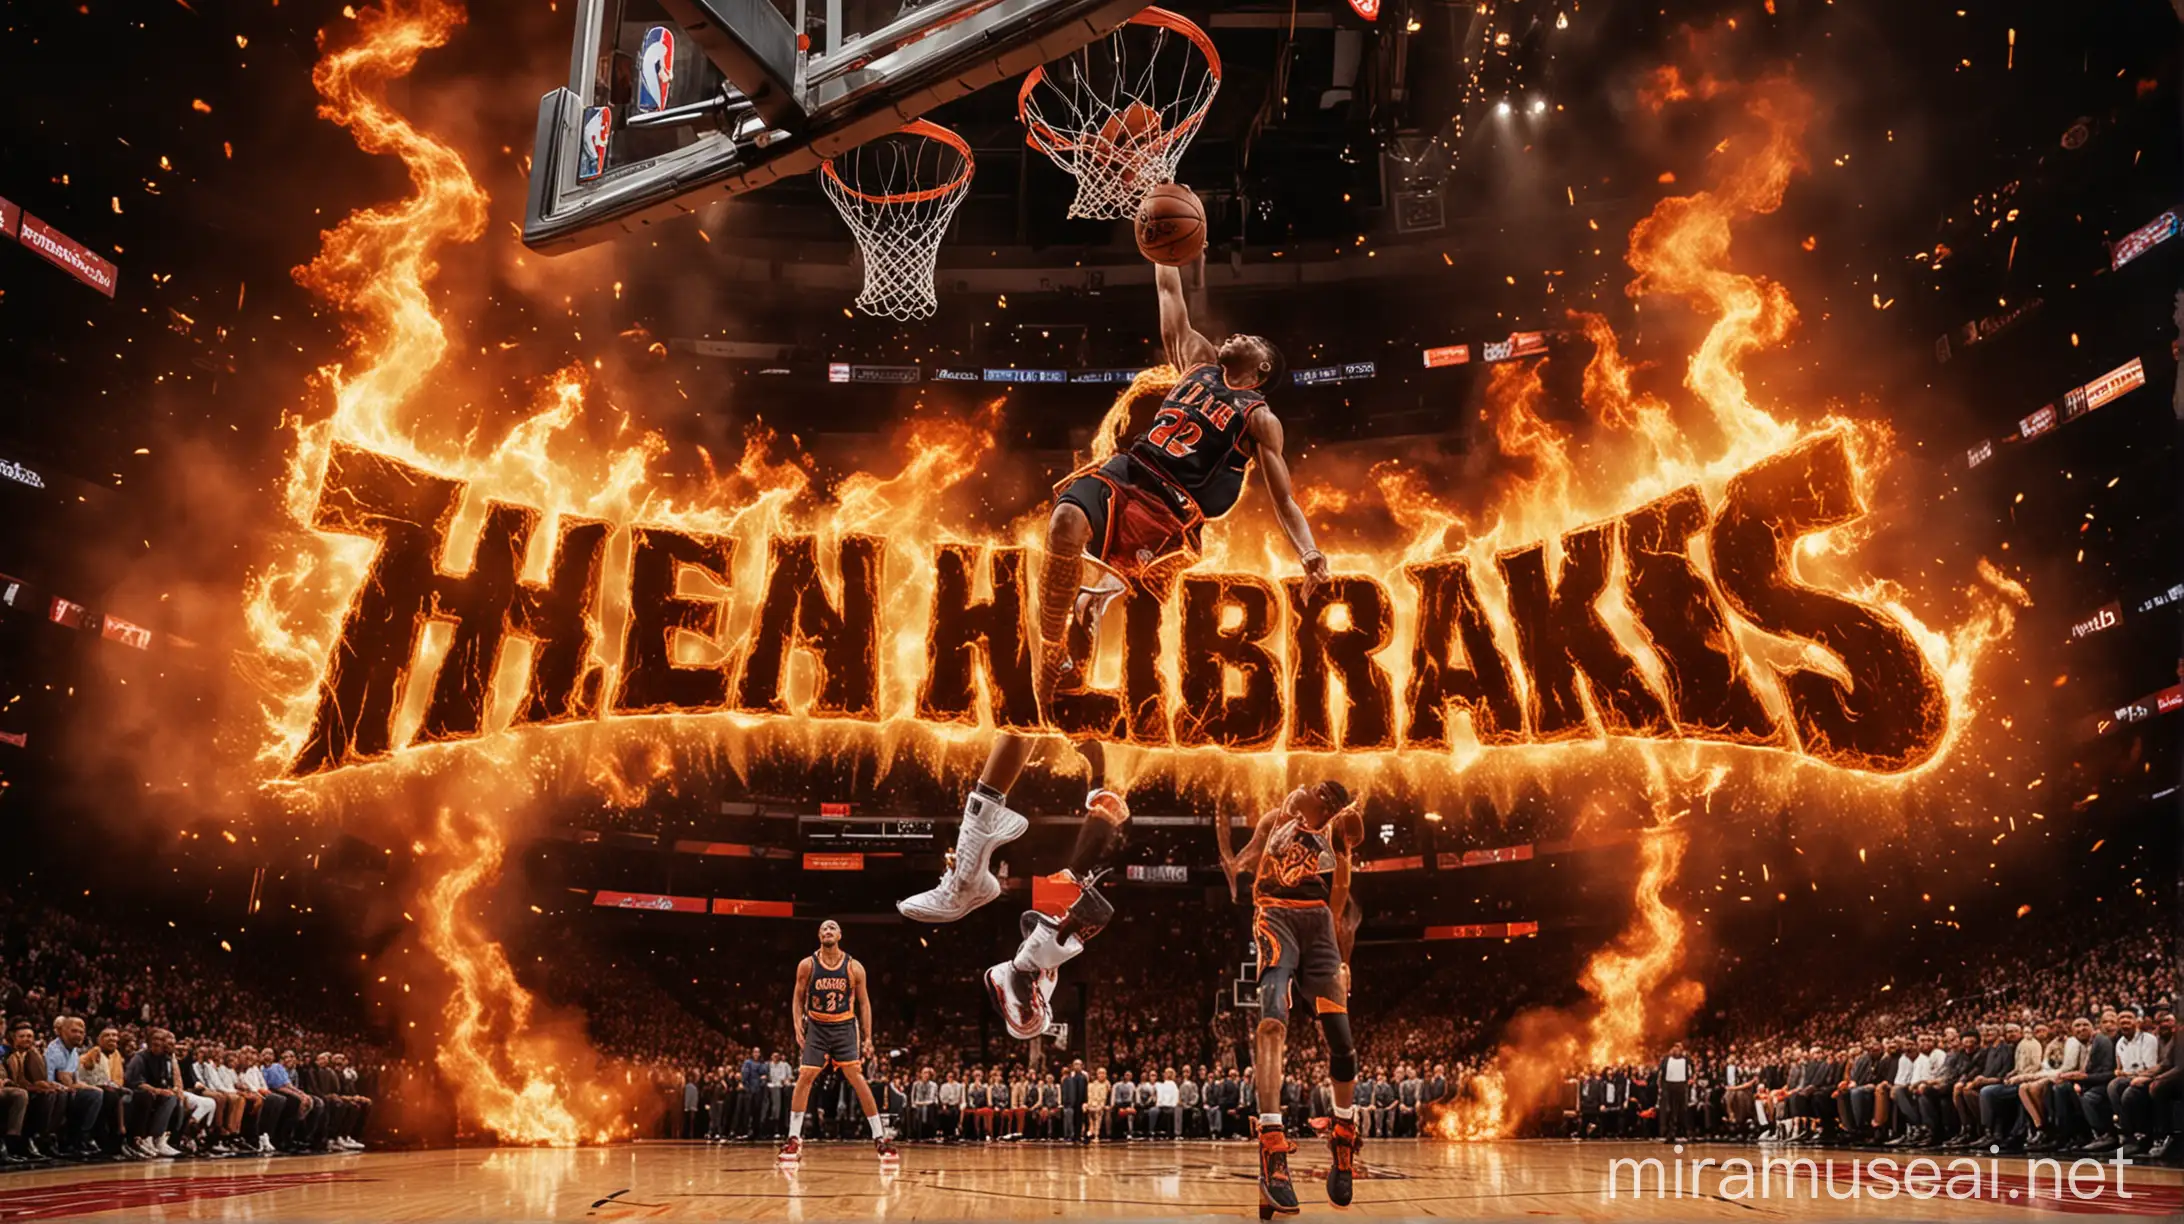 A screenshot from an NBA game with a dramatic comeback moment (e.g., a buzzer-beating shot, a player making a game-winning dunk, etc.). The image is overlaid with flames or fire effects, symbolizing the intensity and passion of the comeback. The title "THE MOST UNBELIEVABLE NBA COMEBACKS" is emblazoned across the top in bold, fiery font, with the flames wrapping around the text. The overall design is dark, with vibrant orange and yellow hues to represent the fire and excitement.